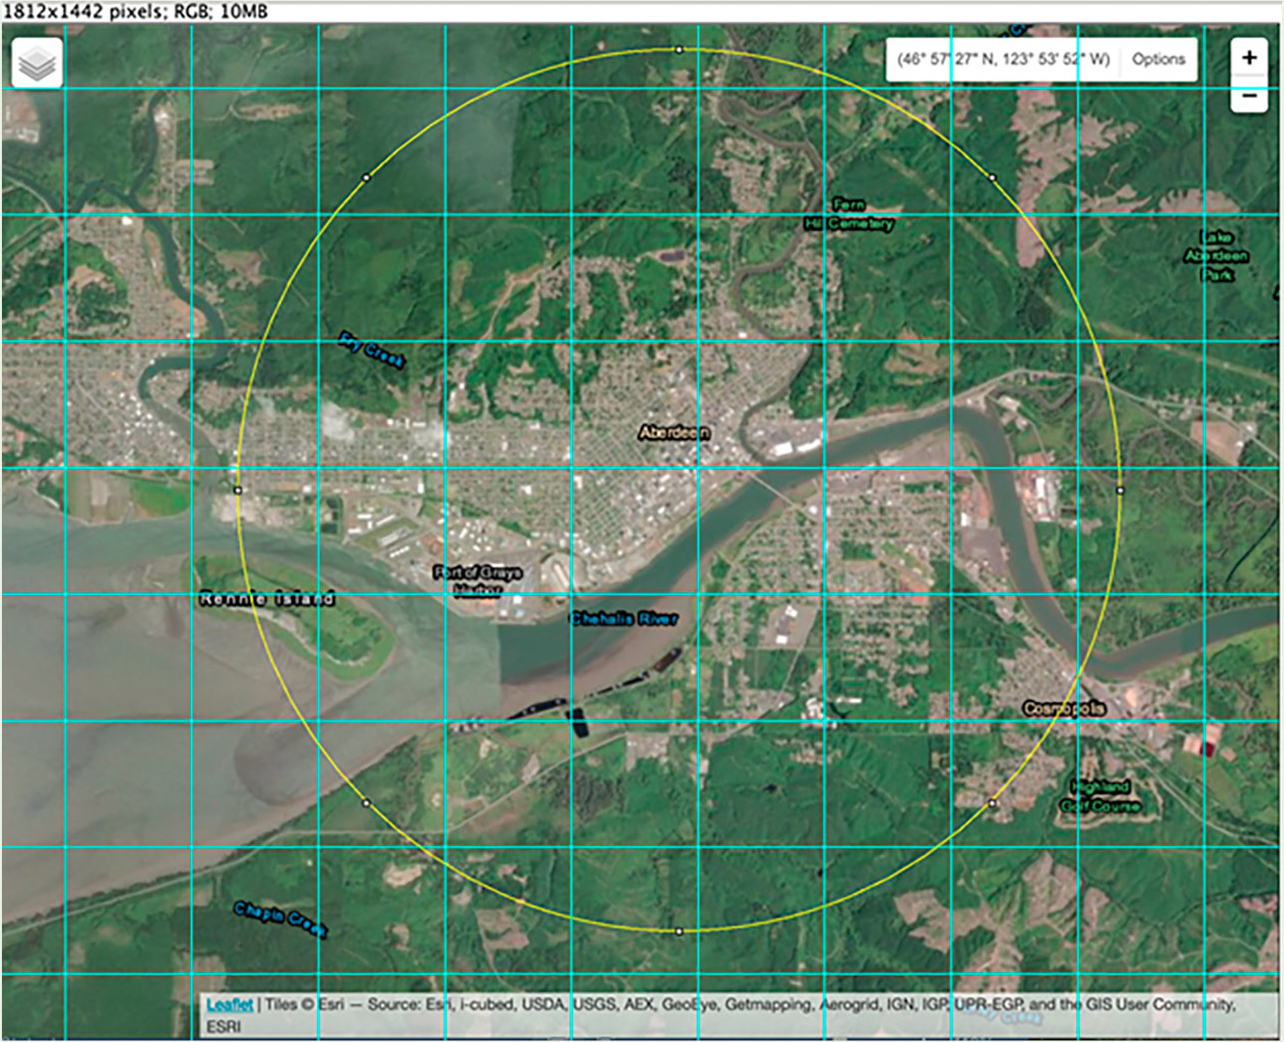 Figure 1 Sample city with grid overlay and centered circle drawn in ImageJ.